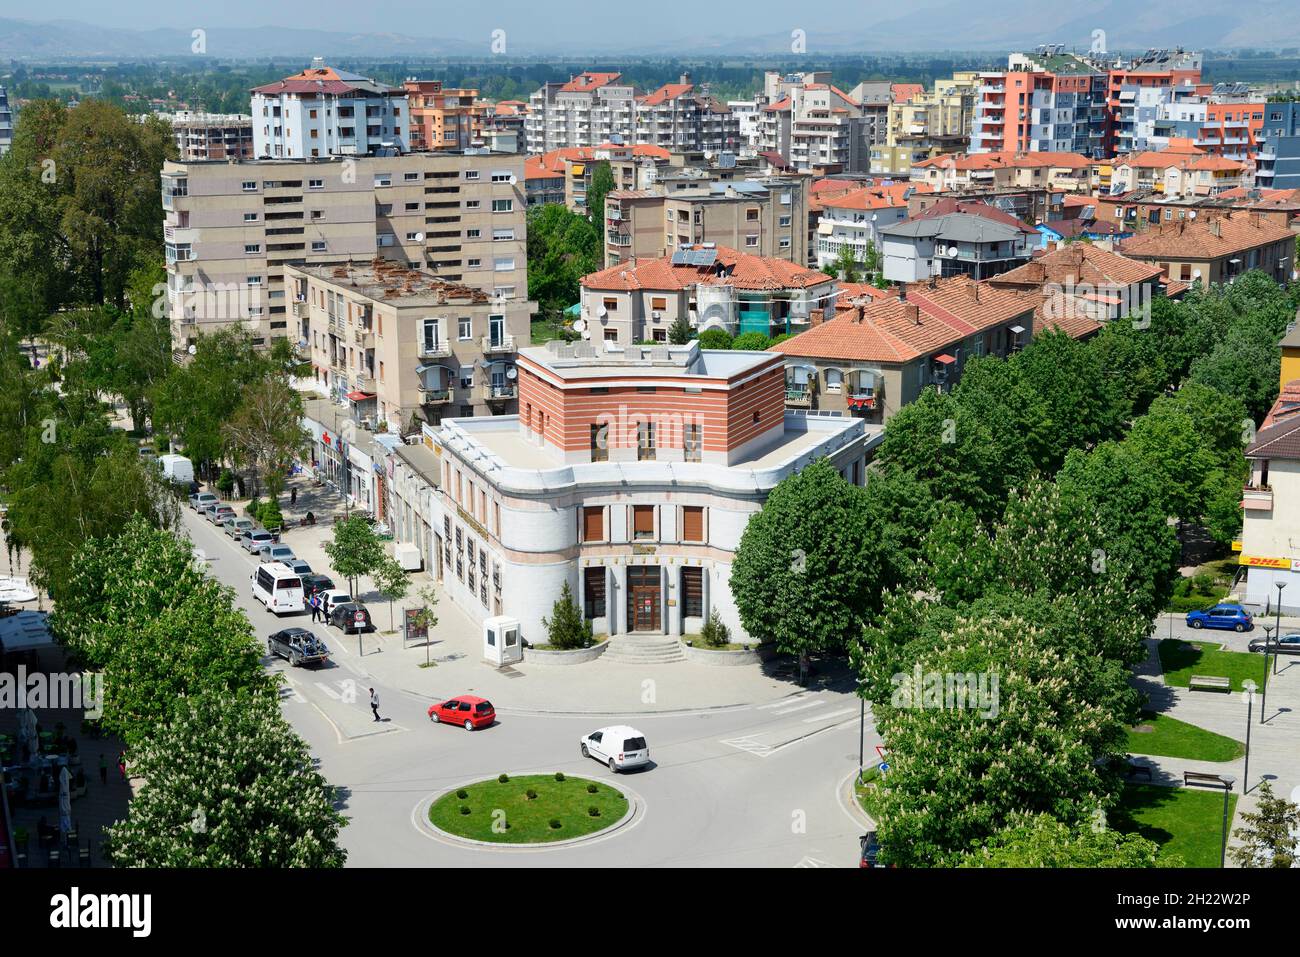 View from the Red Tower, City Centre, Korca, Korca, Albania Stock Photo